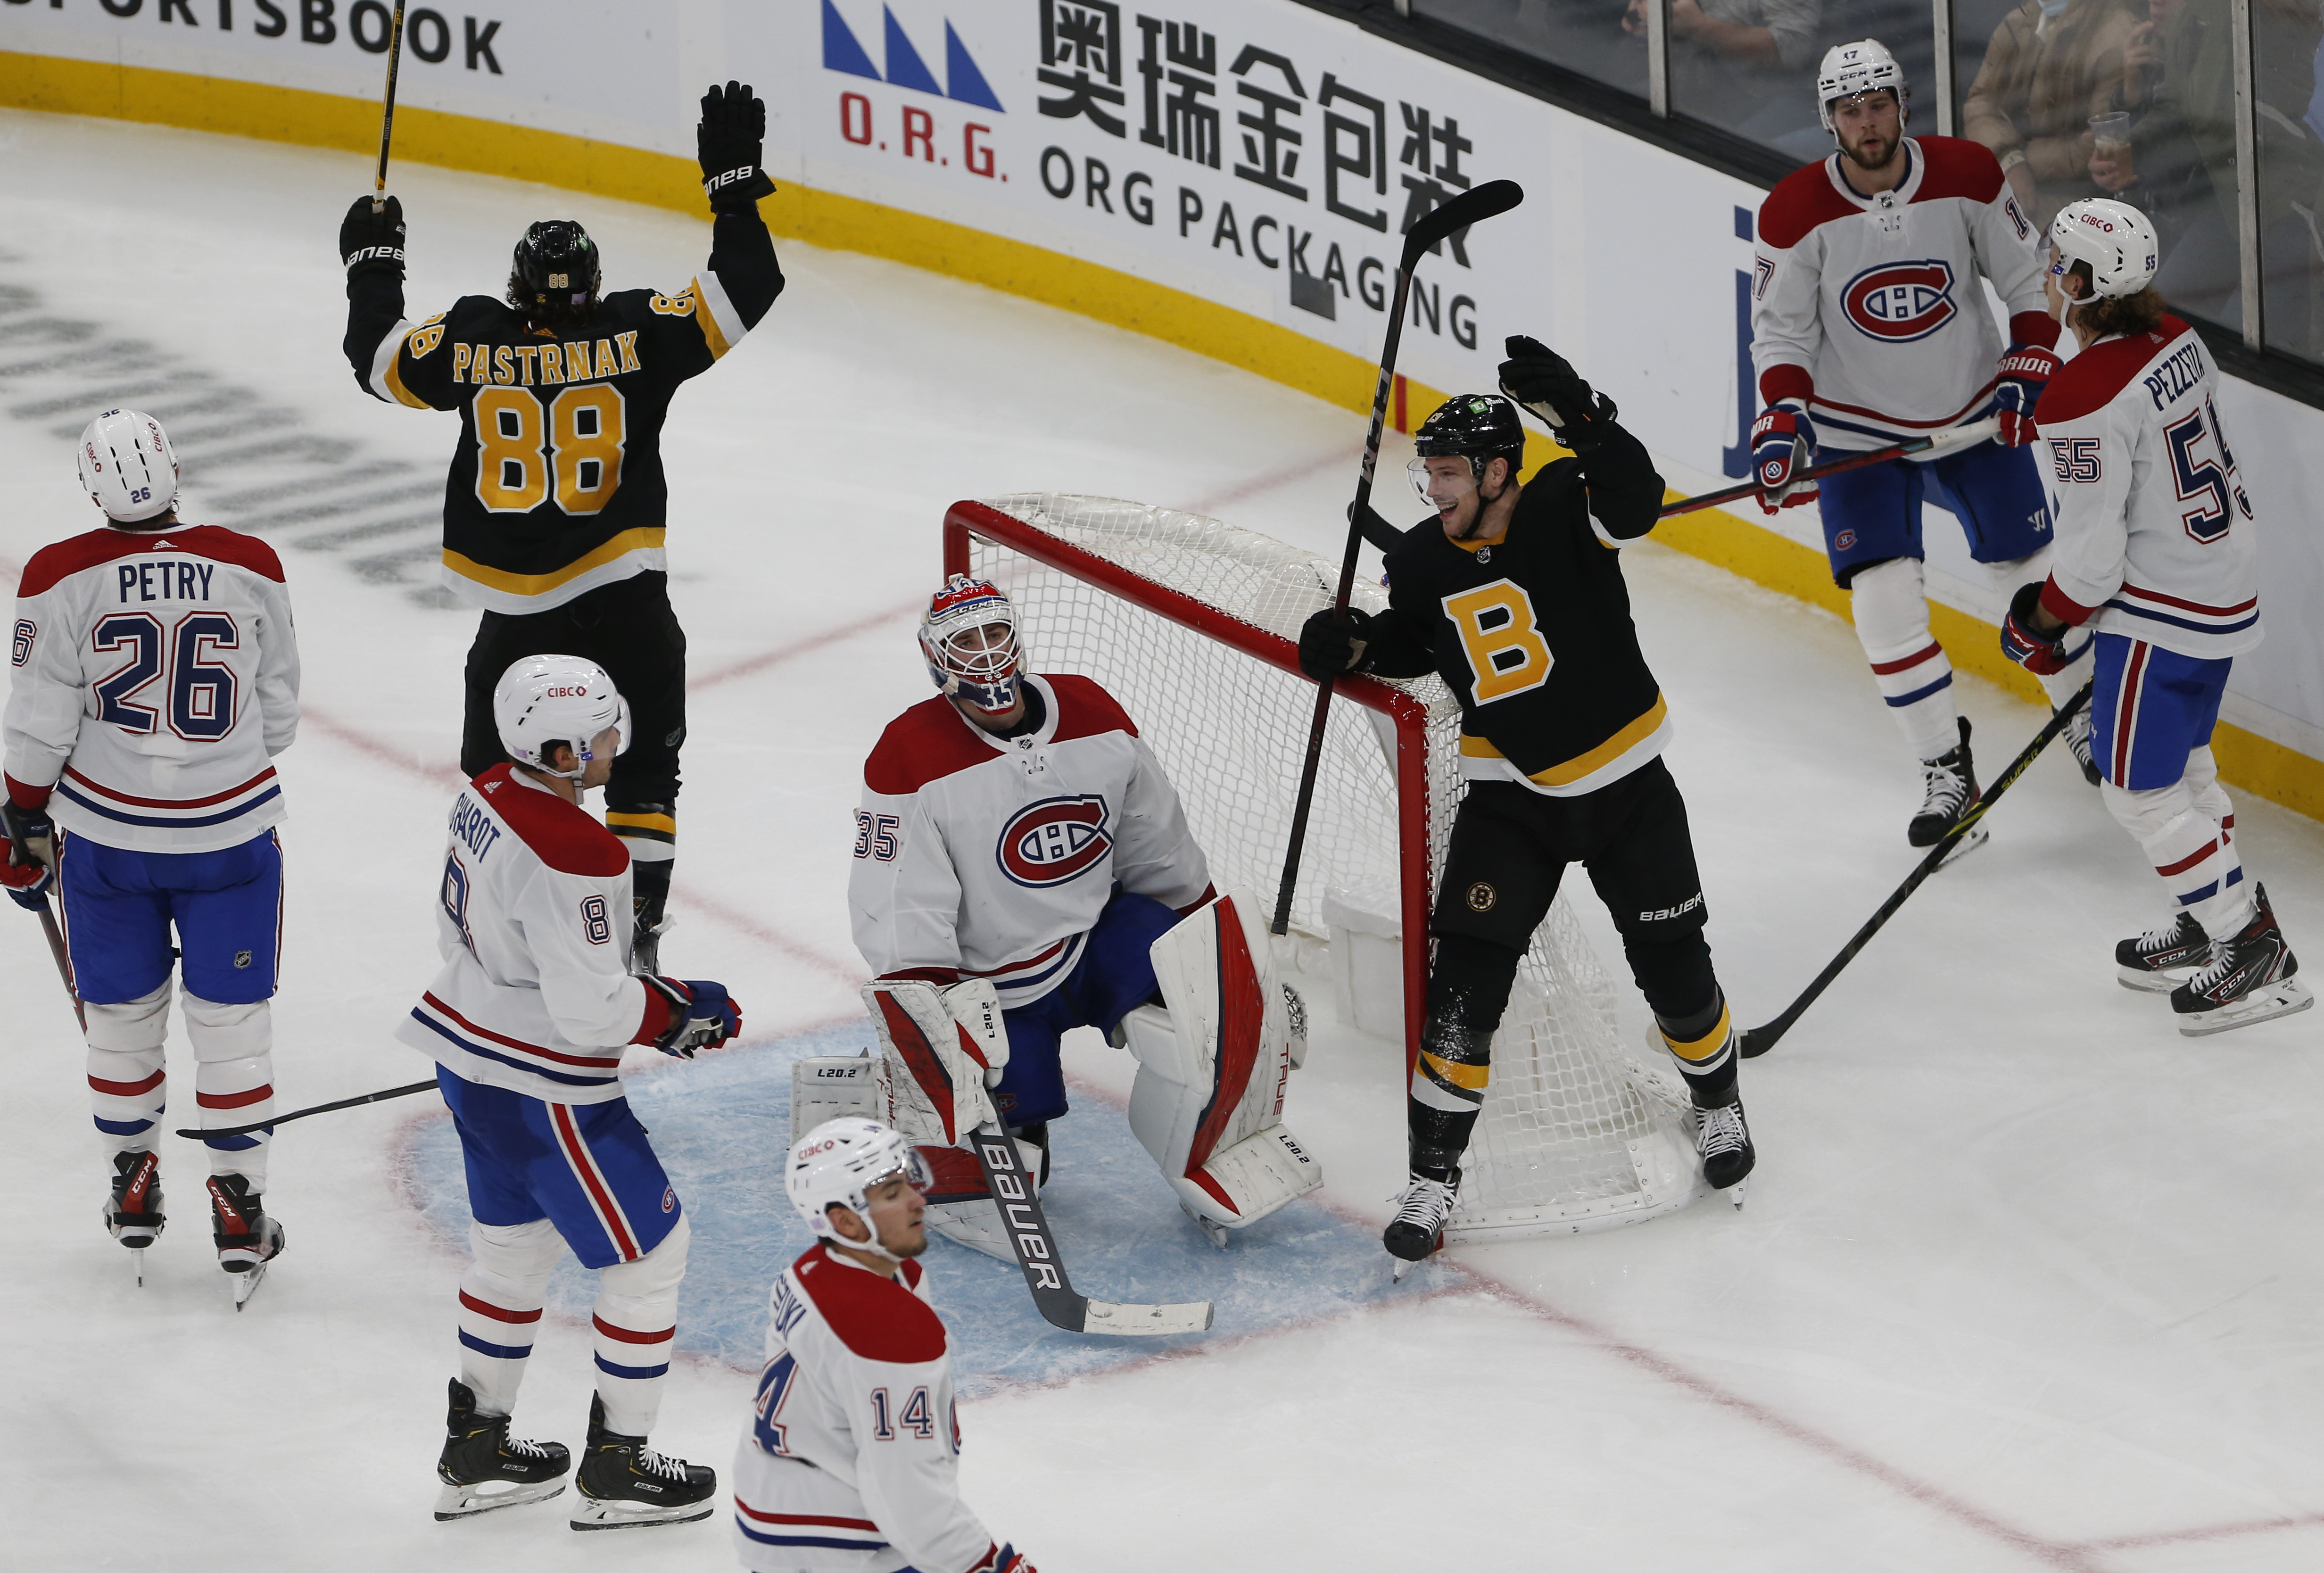 The onus is on me': Charlie McAvoy opens up about getting set straight by  Bruins team leadership - The Boston Globe